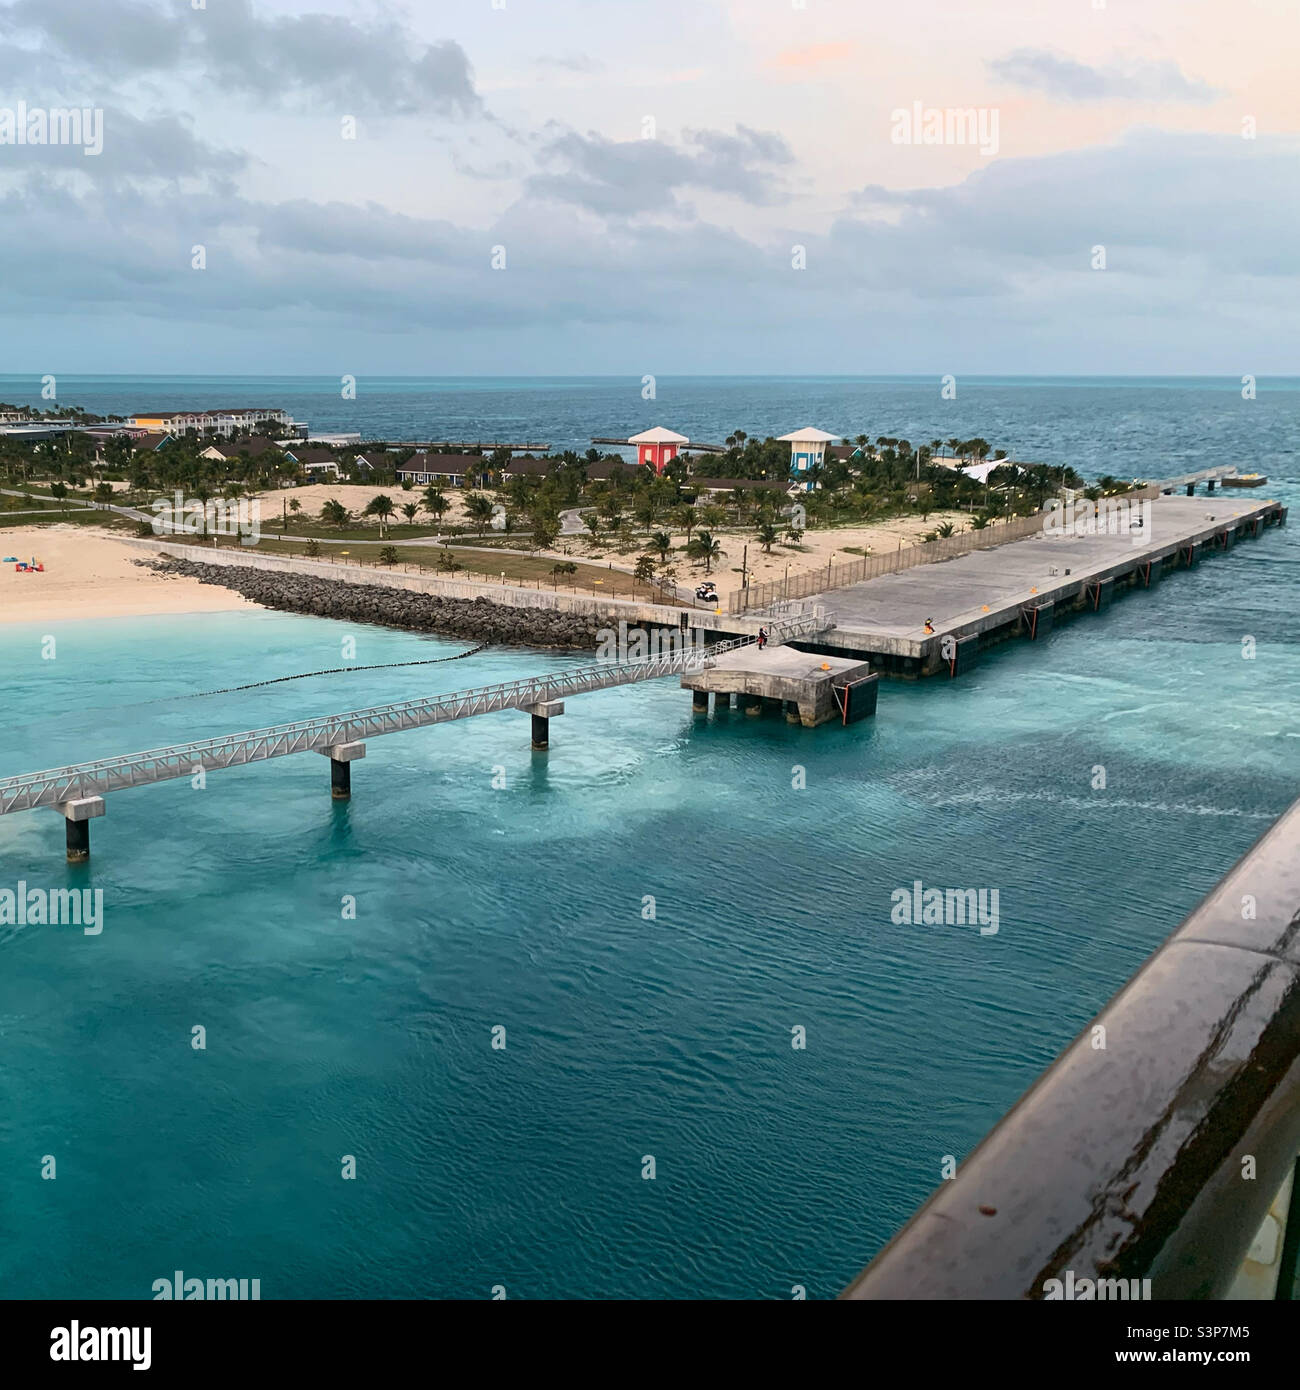 January, 2022, Leaving Ocean Cay, MSC cruise line’s private island, located in Bimini, Bahamas, to return to Miami, Florida on the MSC Divina at the end of a three-day cruise. Stock Photo